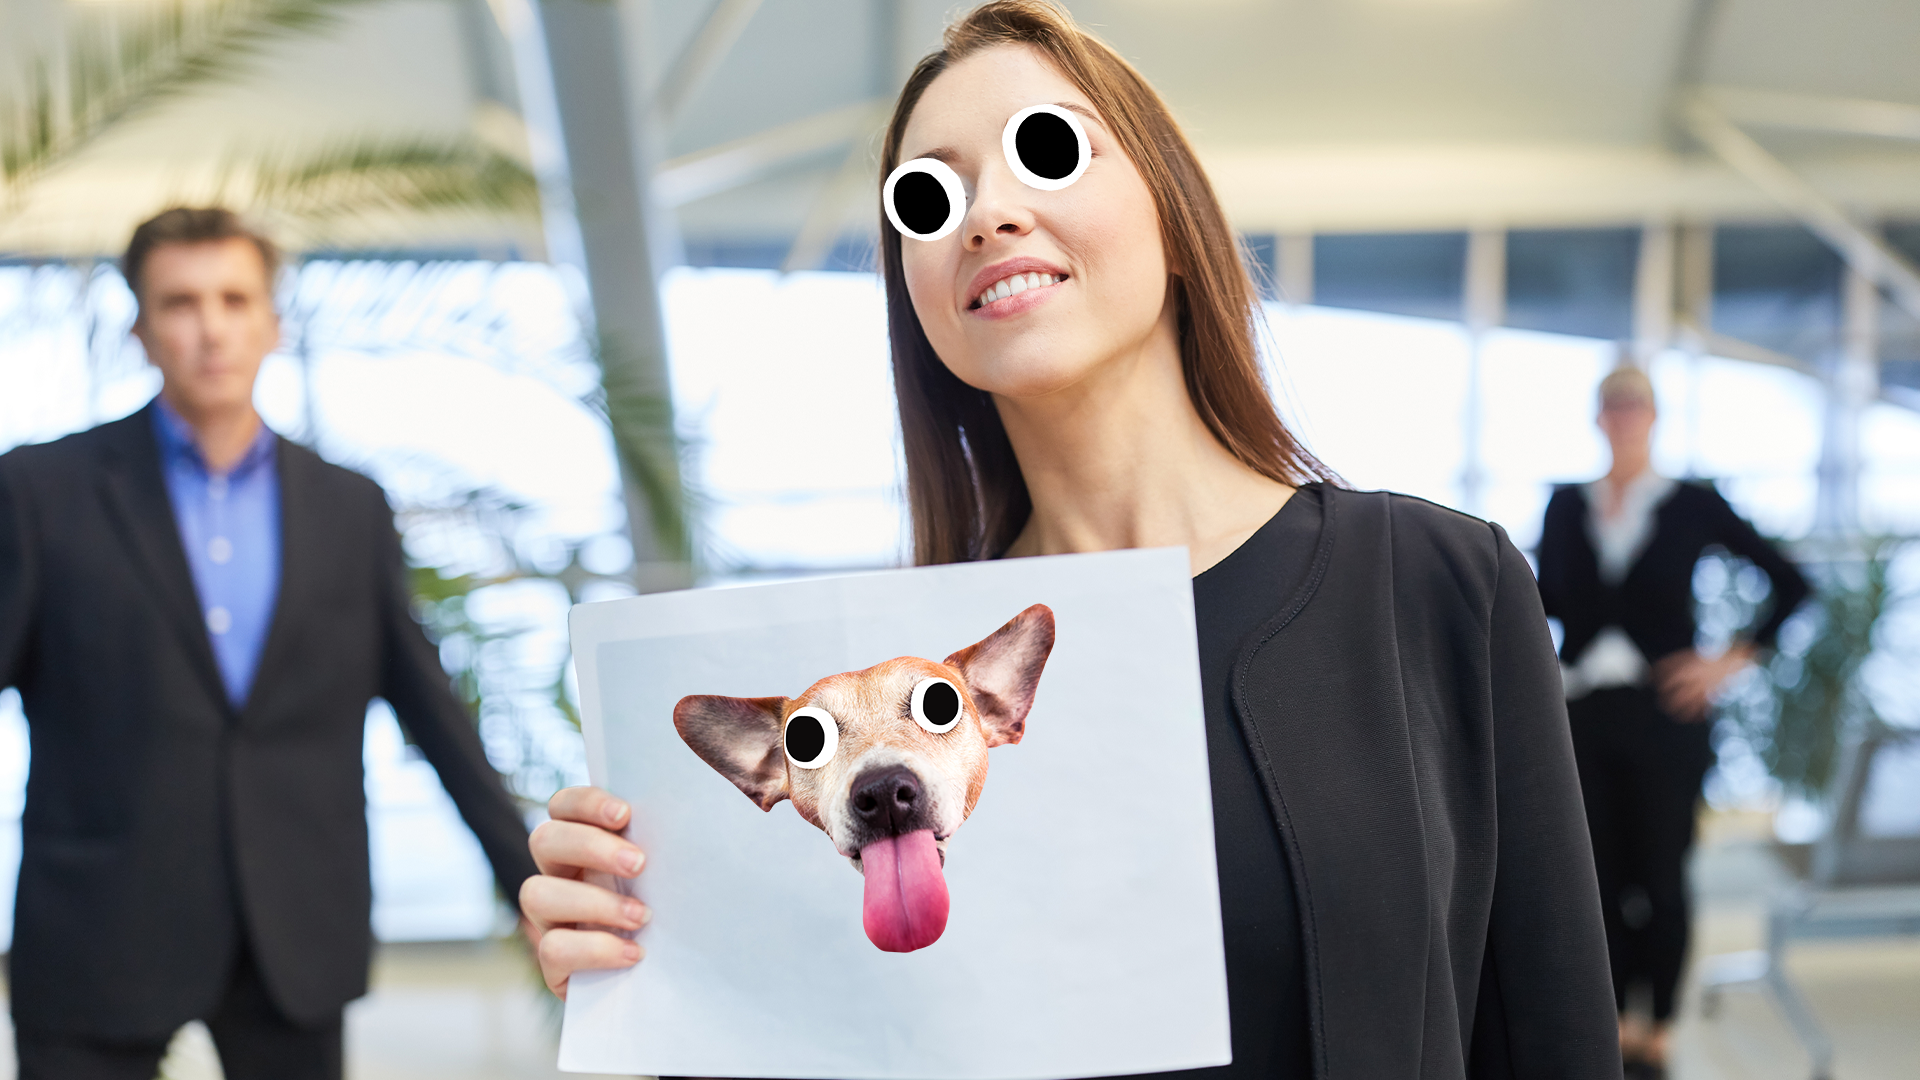 Woman holding up sign with derpy dog face on it